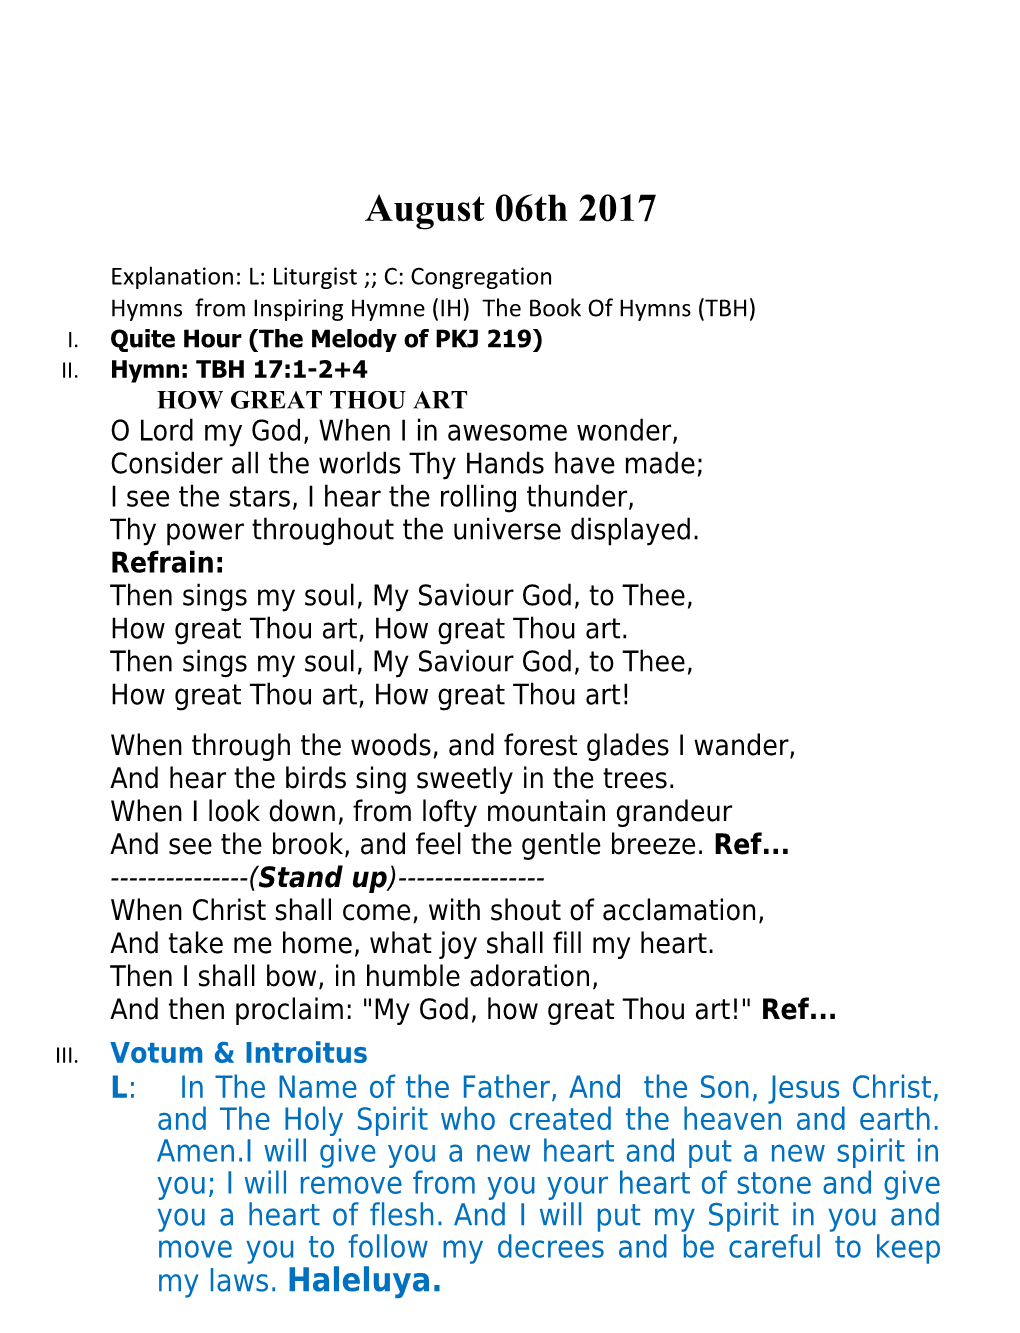 Hymns from Inspiring Hymne (IH) the Book of Hymns (TBH)